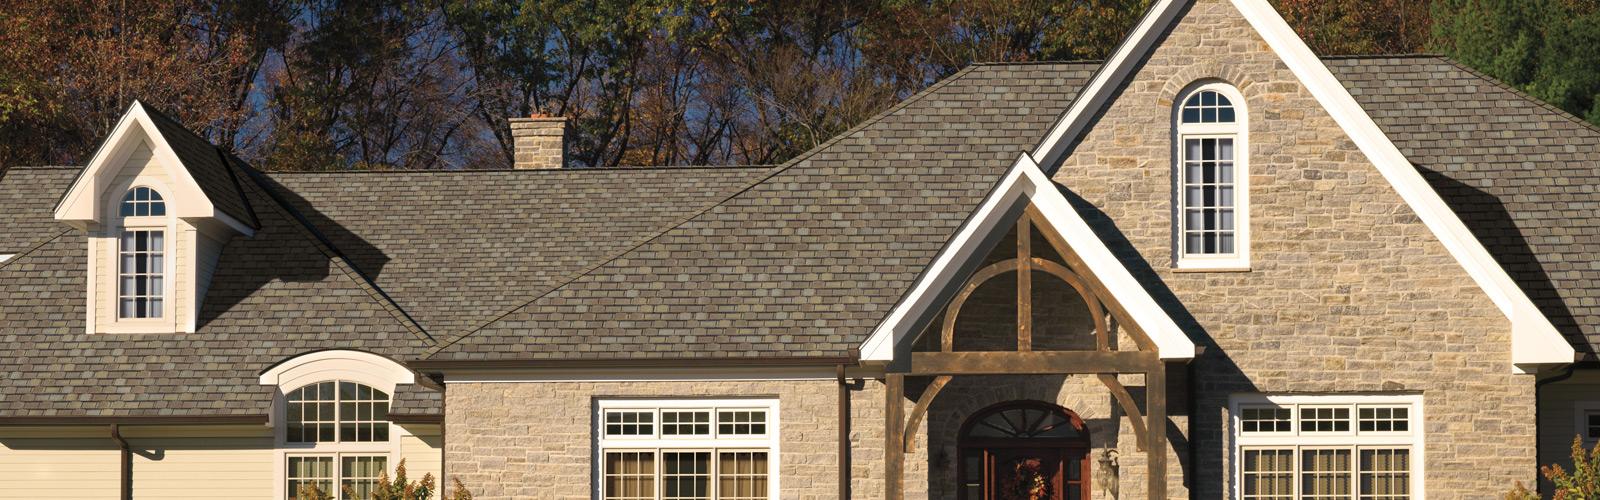 Value Remodeling Roof Replacement Ellicott City MD